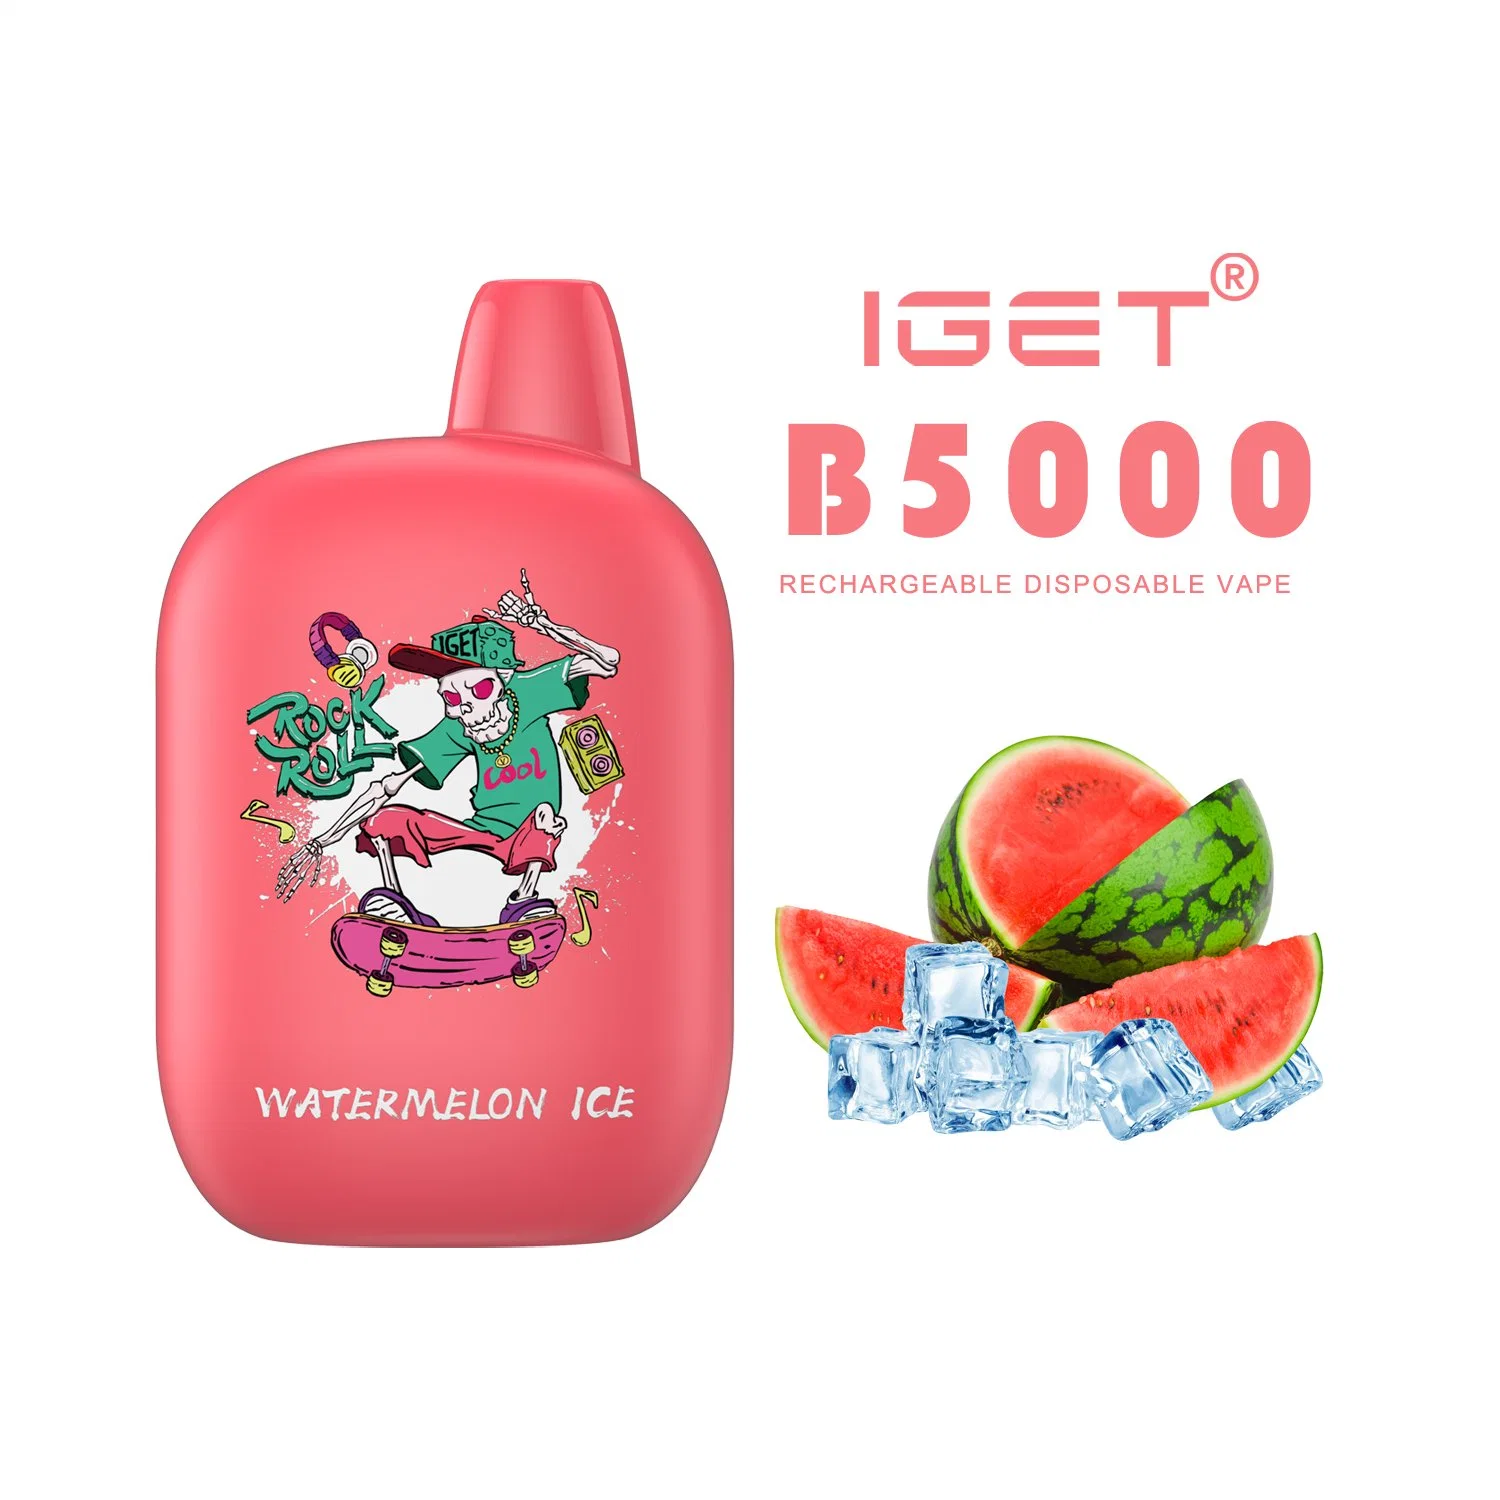 Iget B5000 Puffs Rechargeable Disposable/Chargeable Vape Box